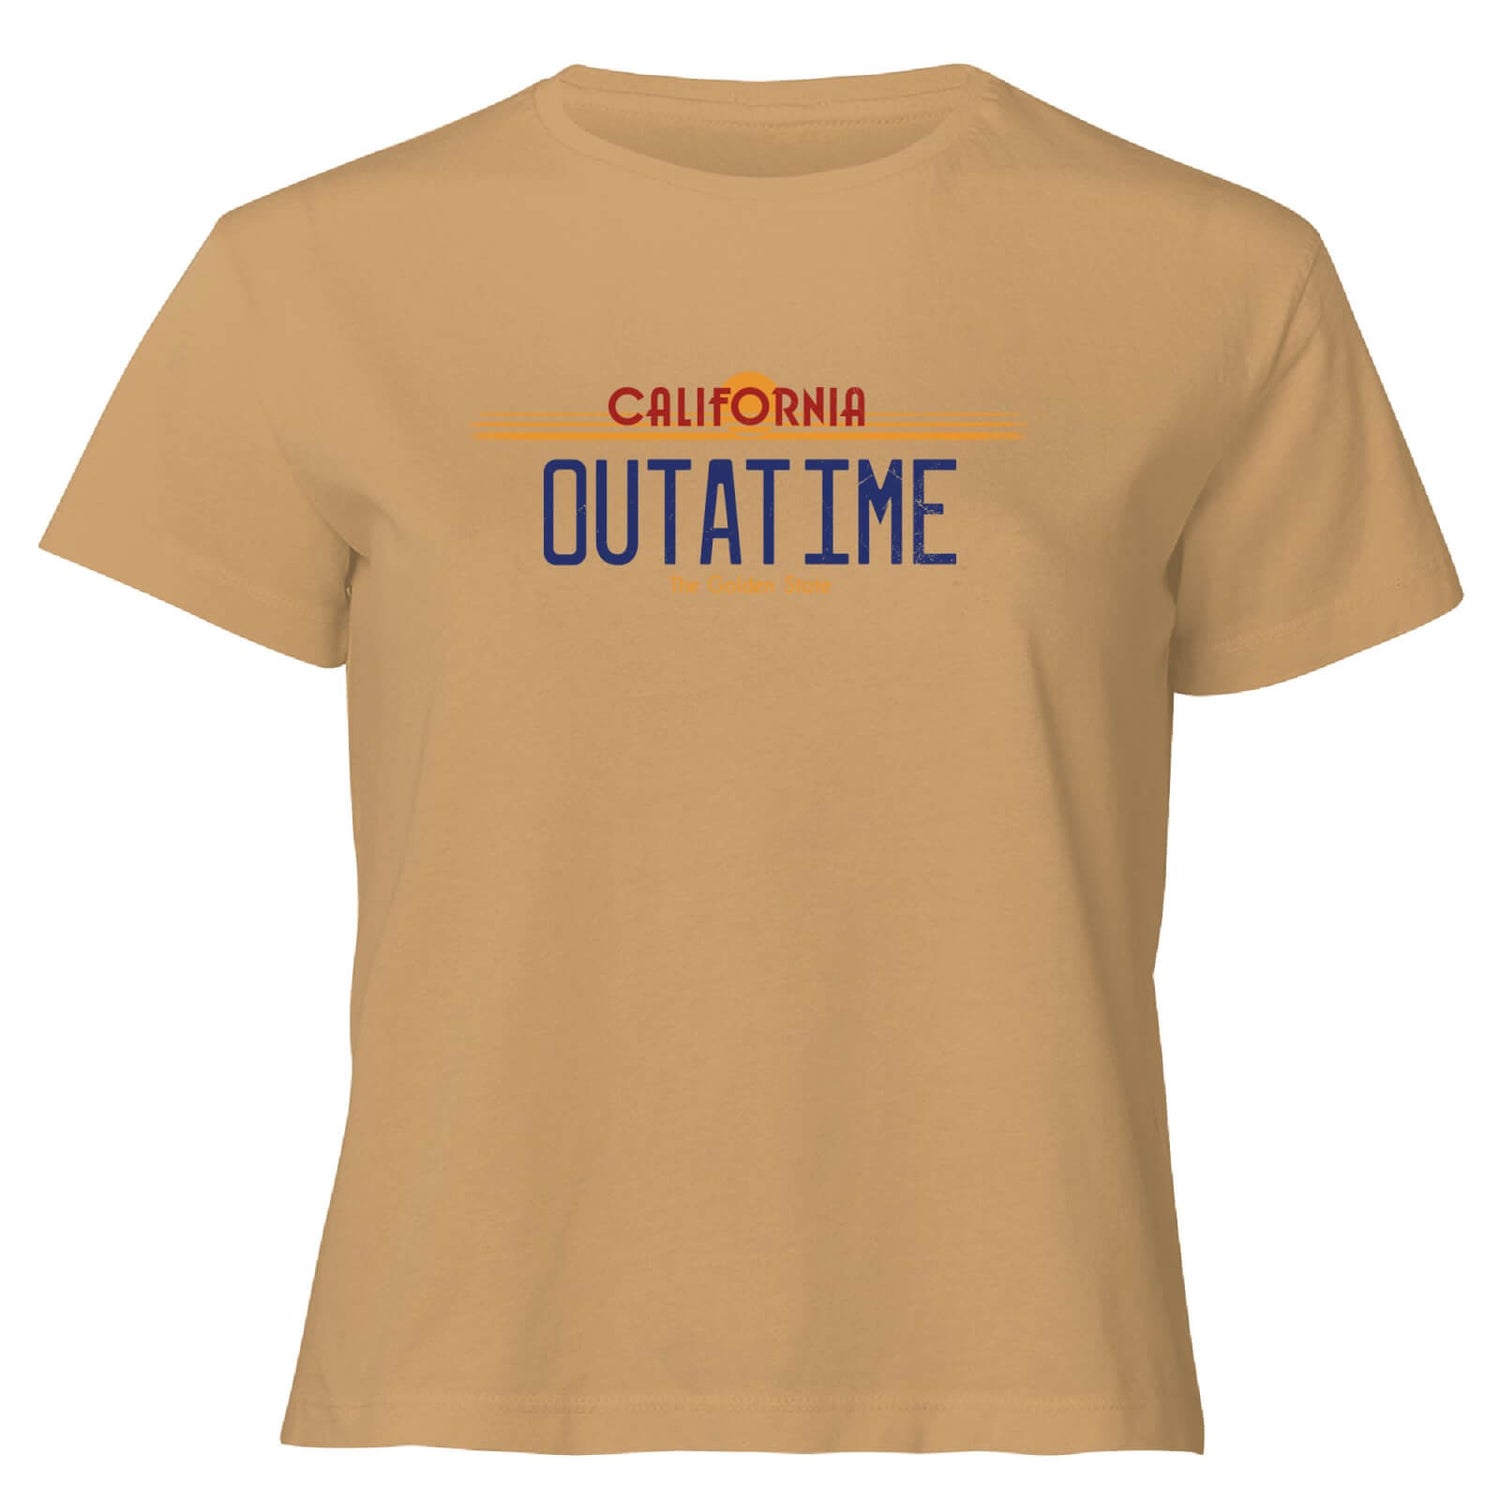 Back to the Future Outatime Plate Women's Cropped T-Shirt - Tan